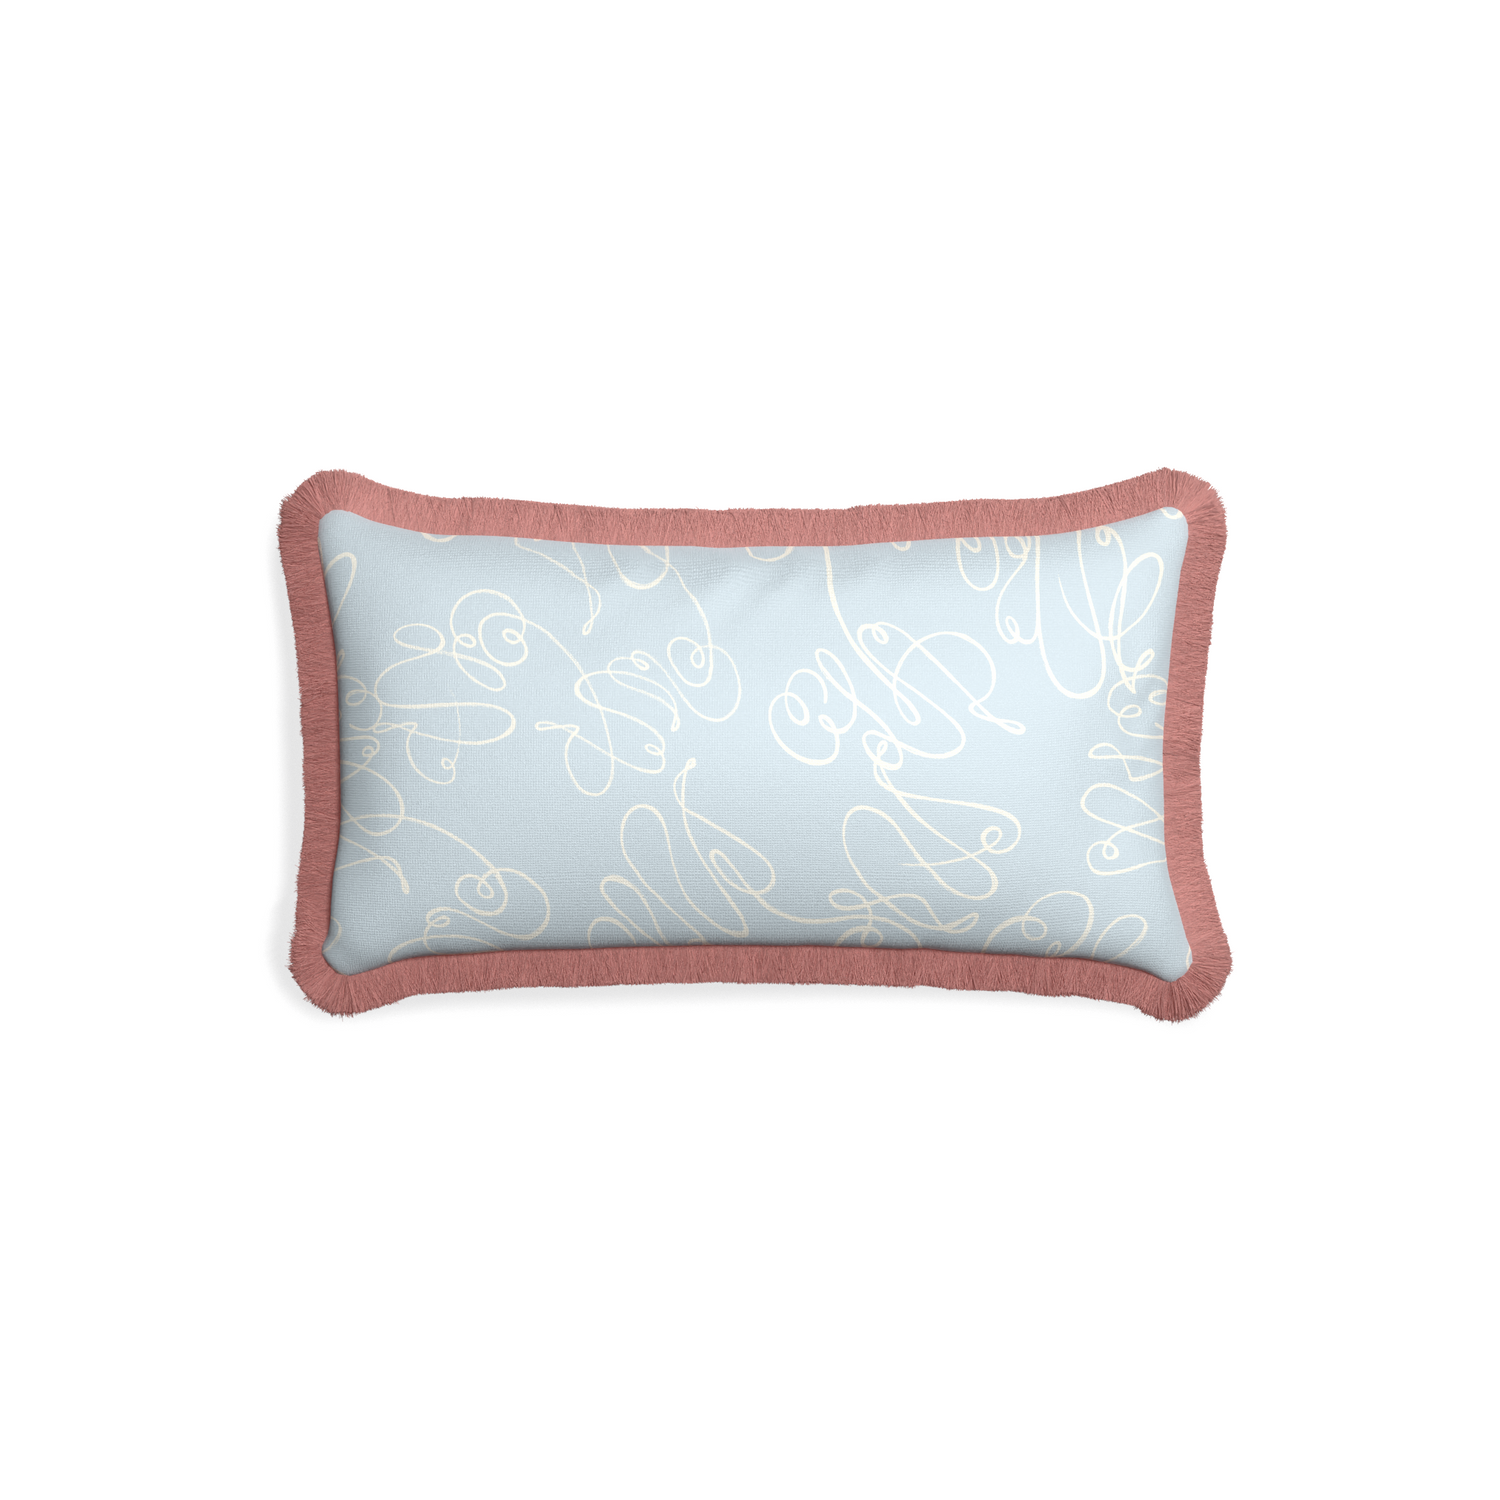 Petite-lumbar mirabella custom powder blue abstractpillow with d fringe on white background